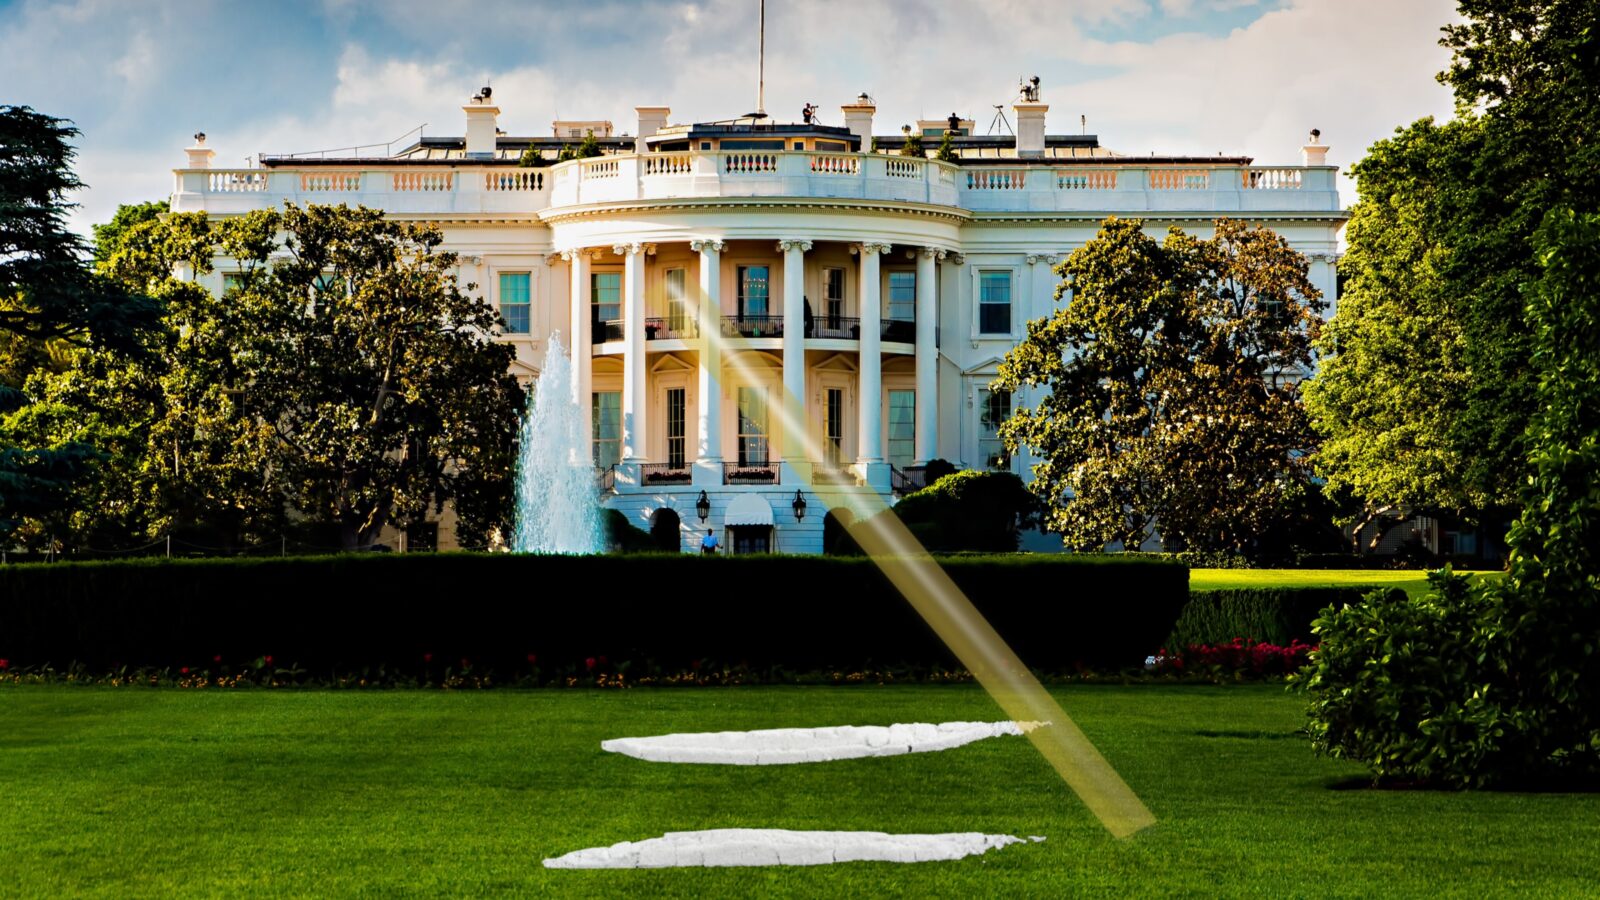 The U.S. Secret Service is Investigating Cocaine Found in the White House